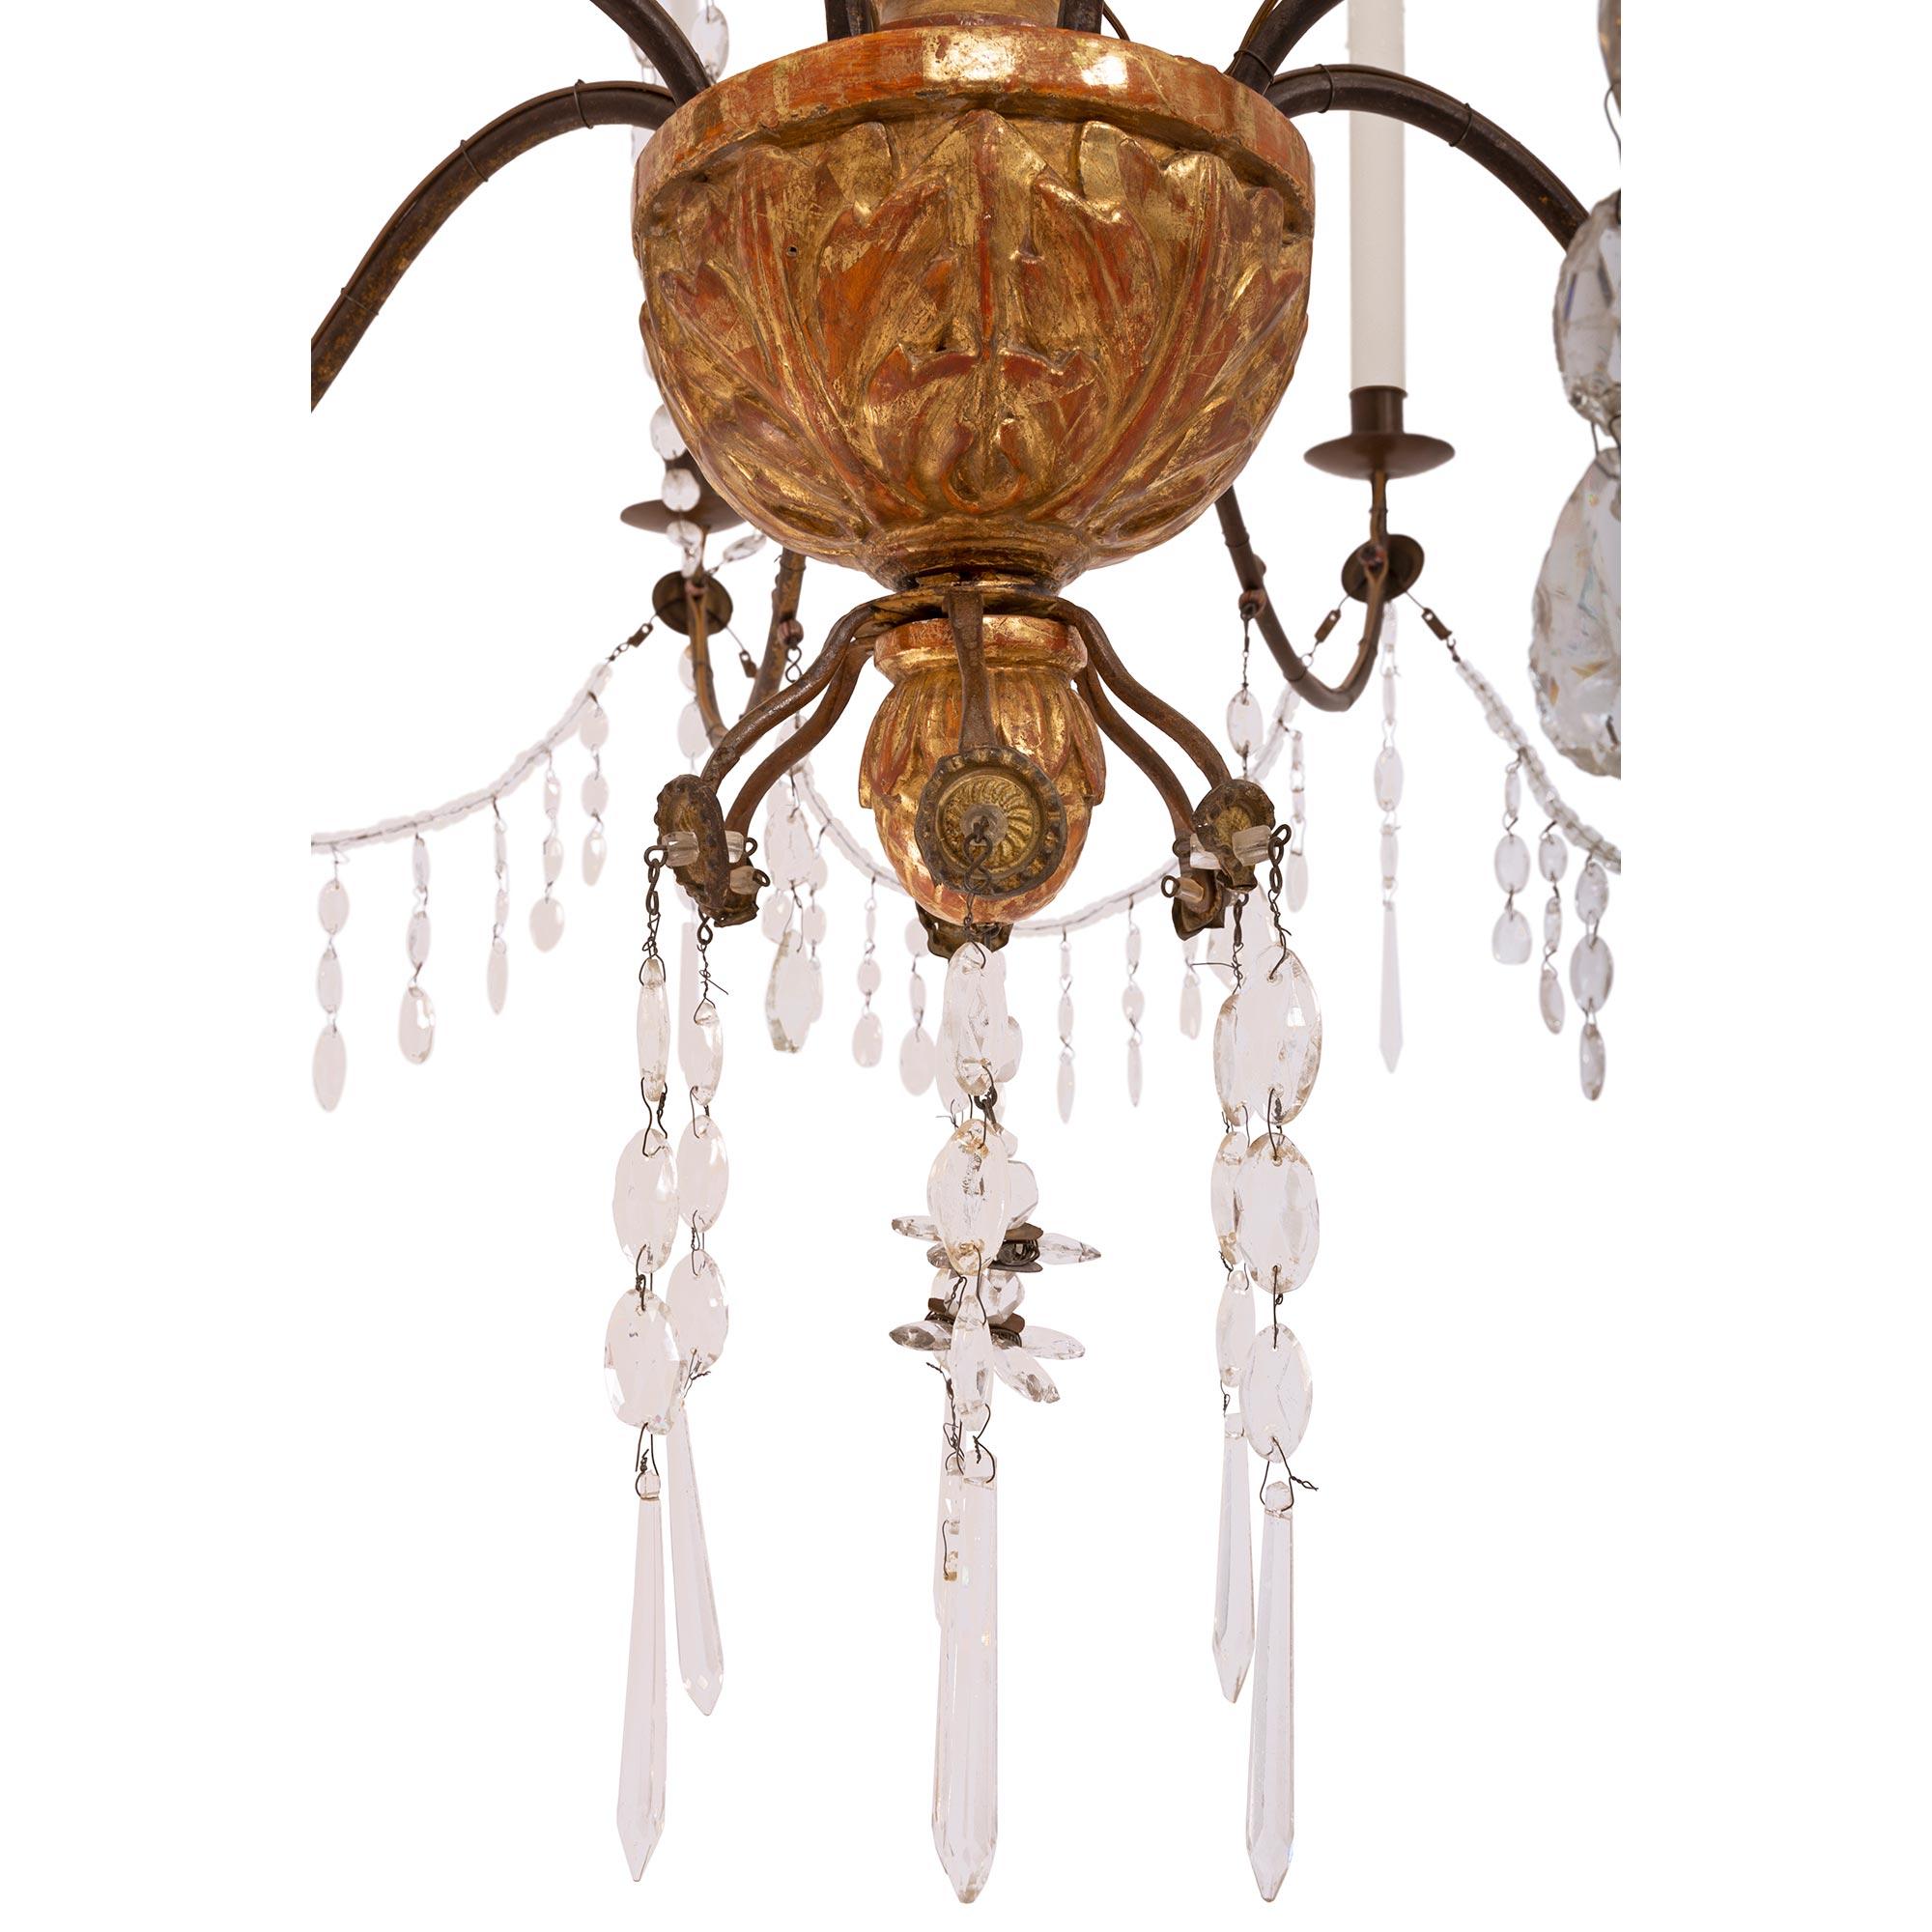 Italian Early 19th Century Mecca, Iron, Crystal, and Cut Glass Chandelier For Sale 4